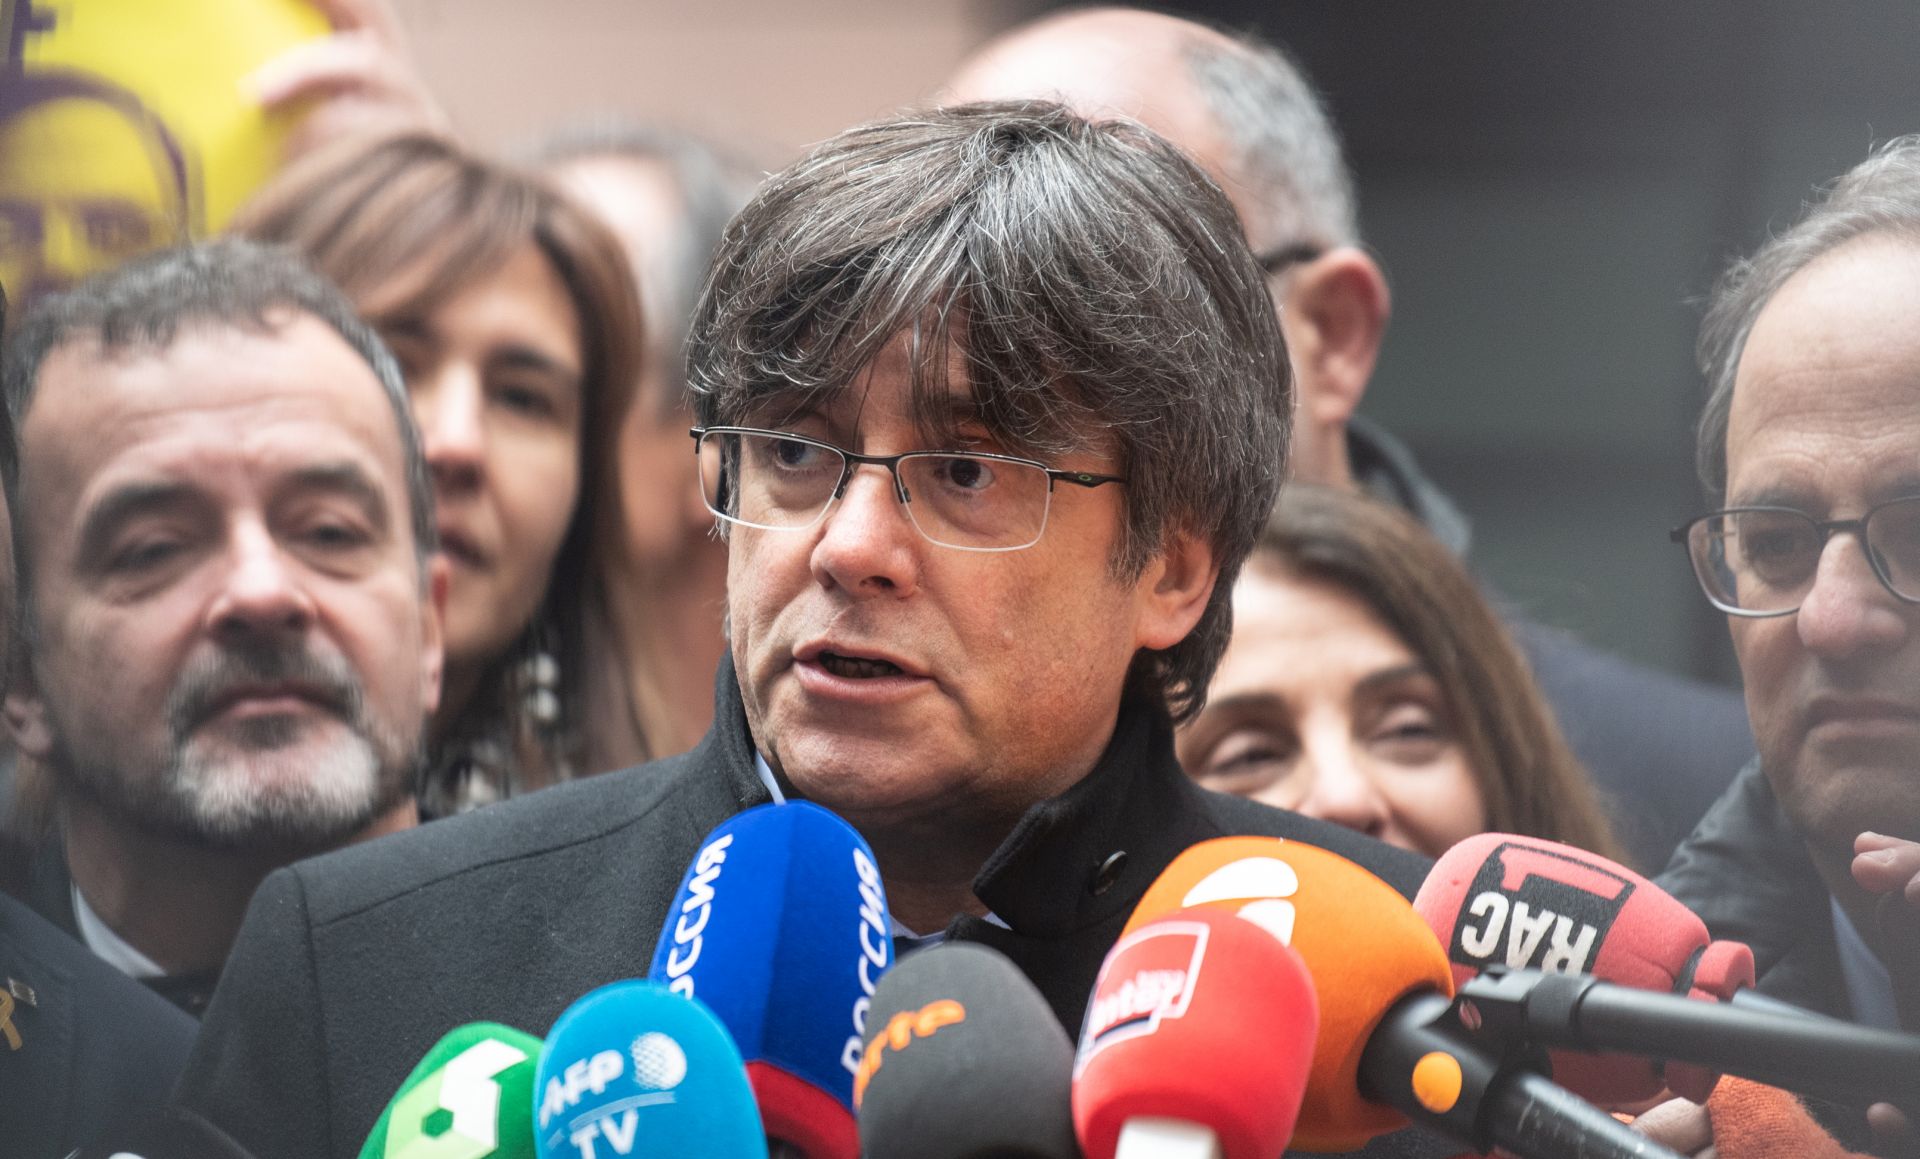 epa08124941 Former member of the Catalan government Carles Puigdemont (C) speaks to journalists before his first plenary session as members of the European Parliament in Strasbourg, France, 13 January 2020.  EPA/PATRICK SEEGER